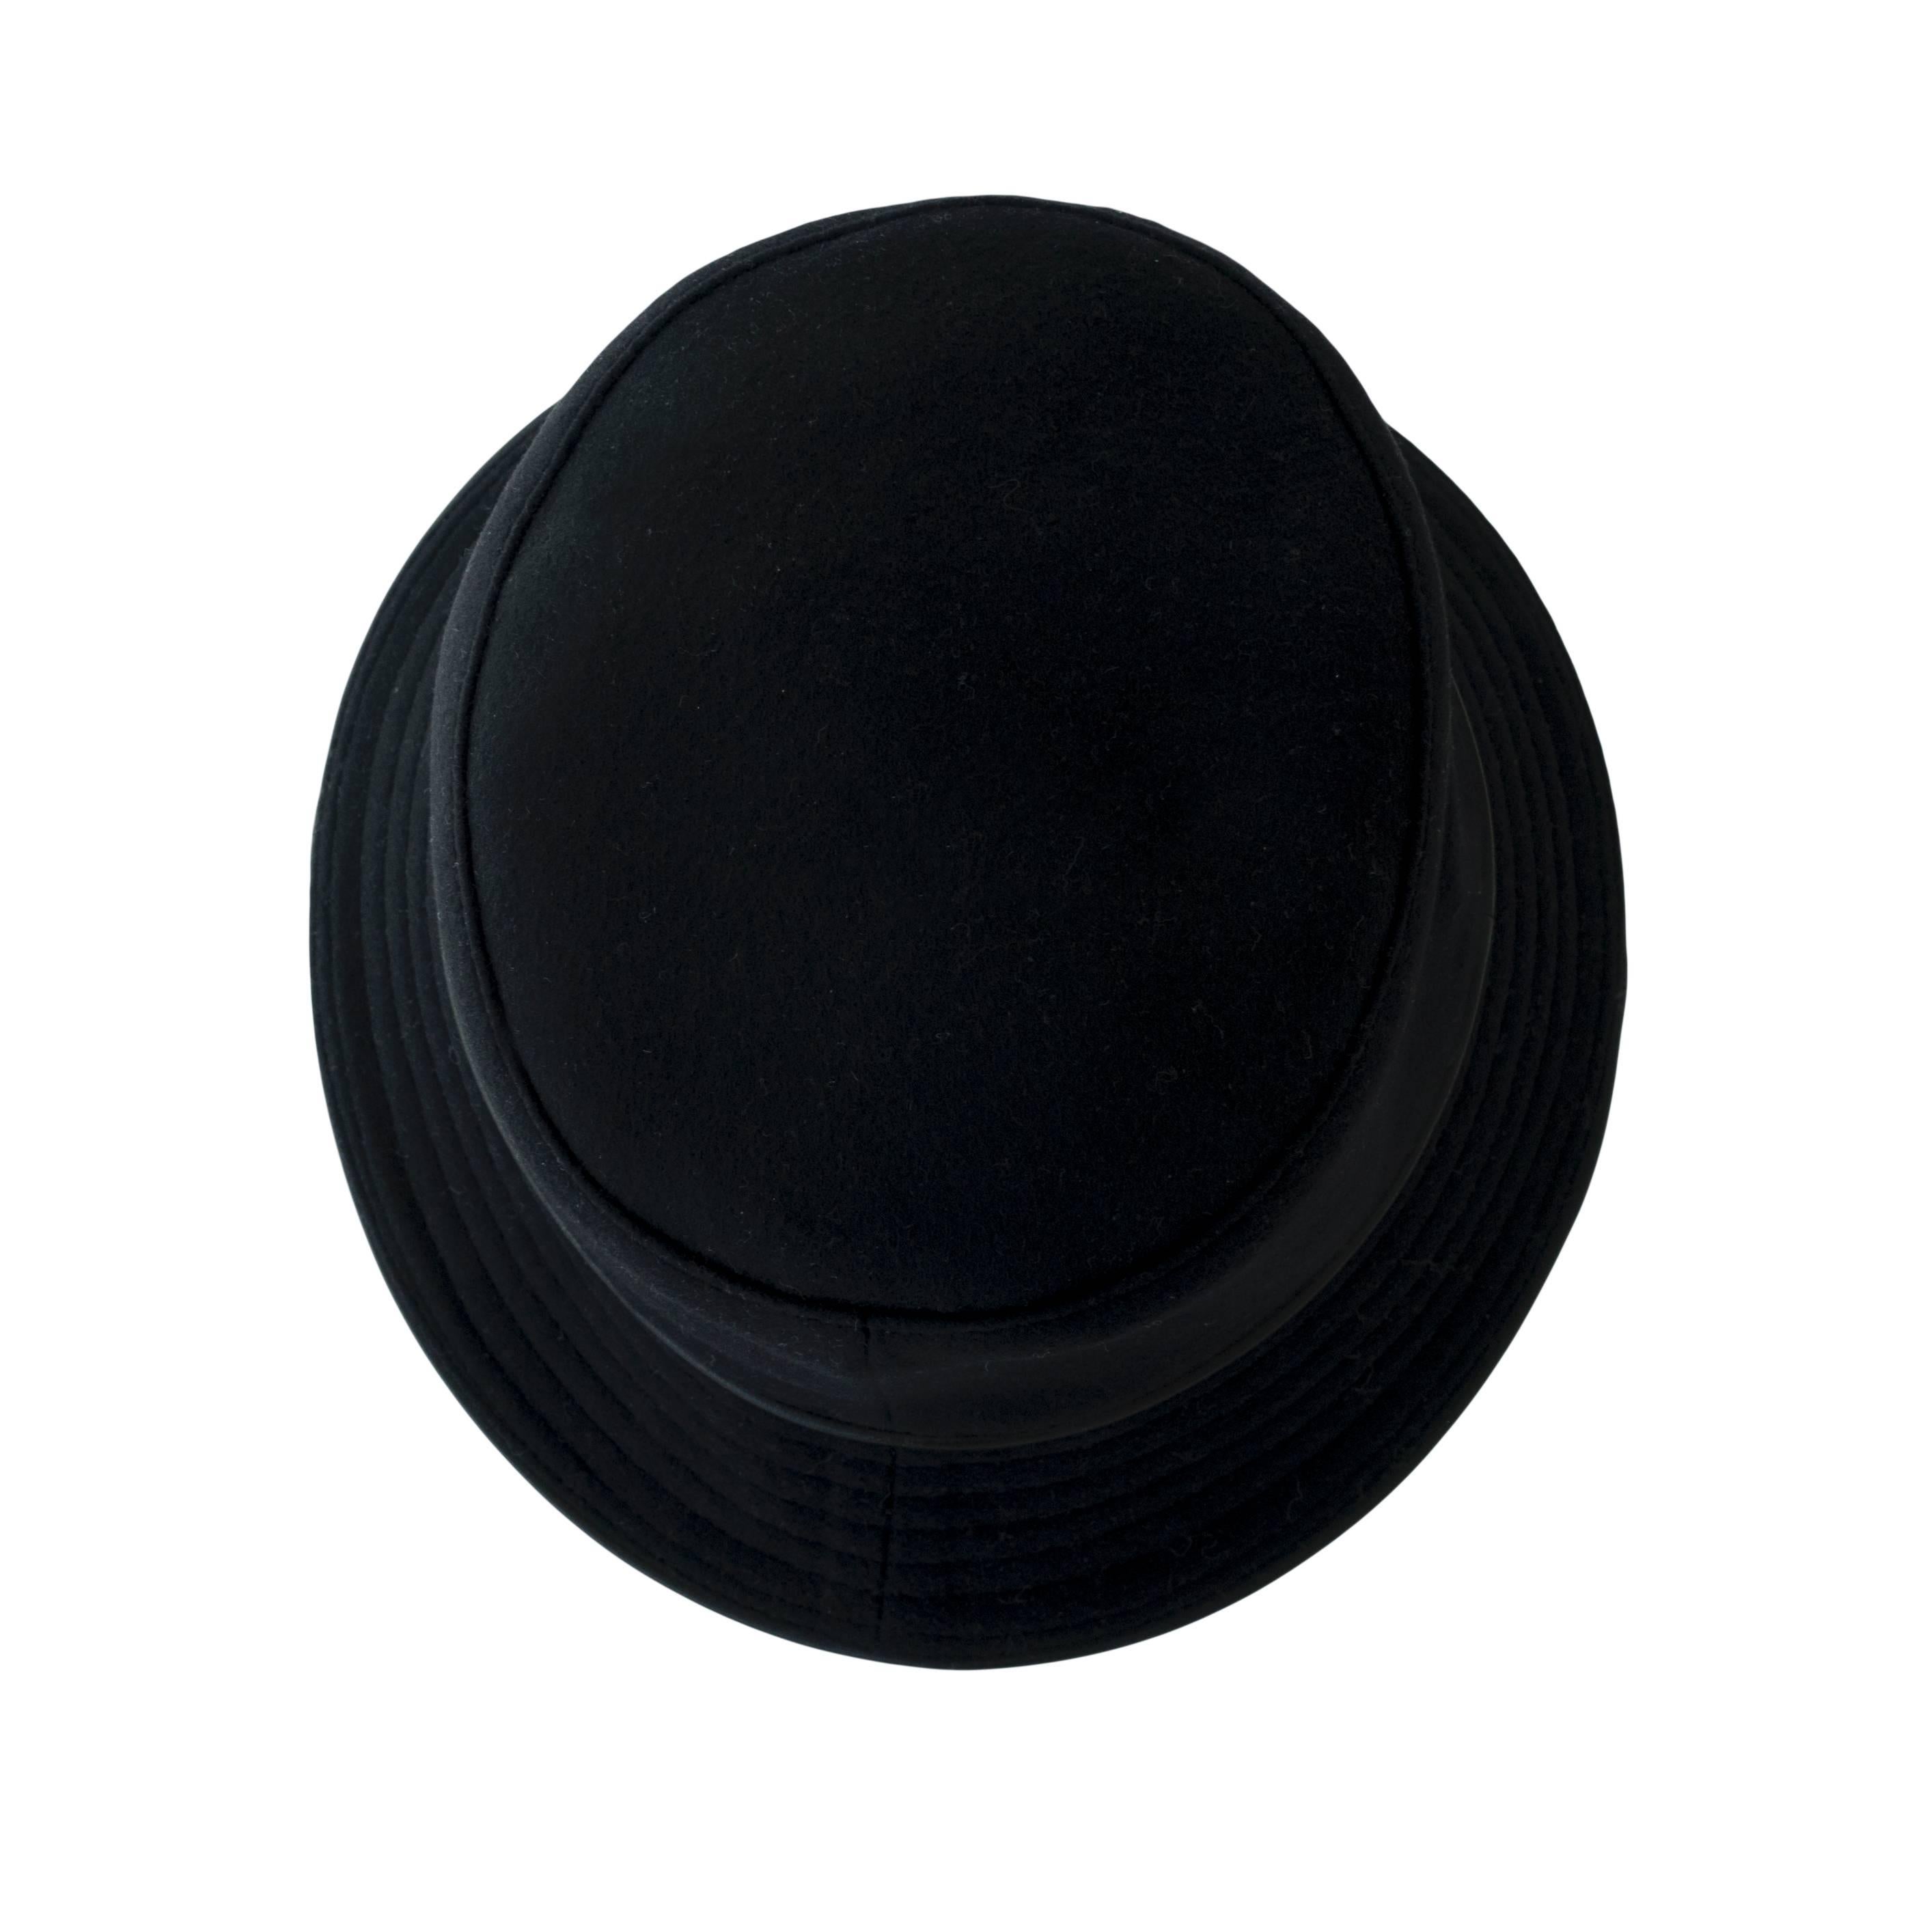 Black Hermes Loulou Cashmere Hat Lambskin Band 58 Charming Below $1045 Retail